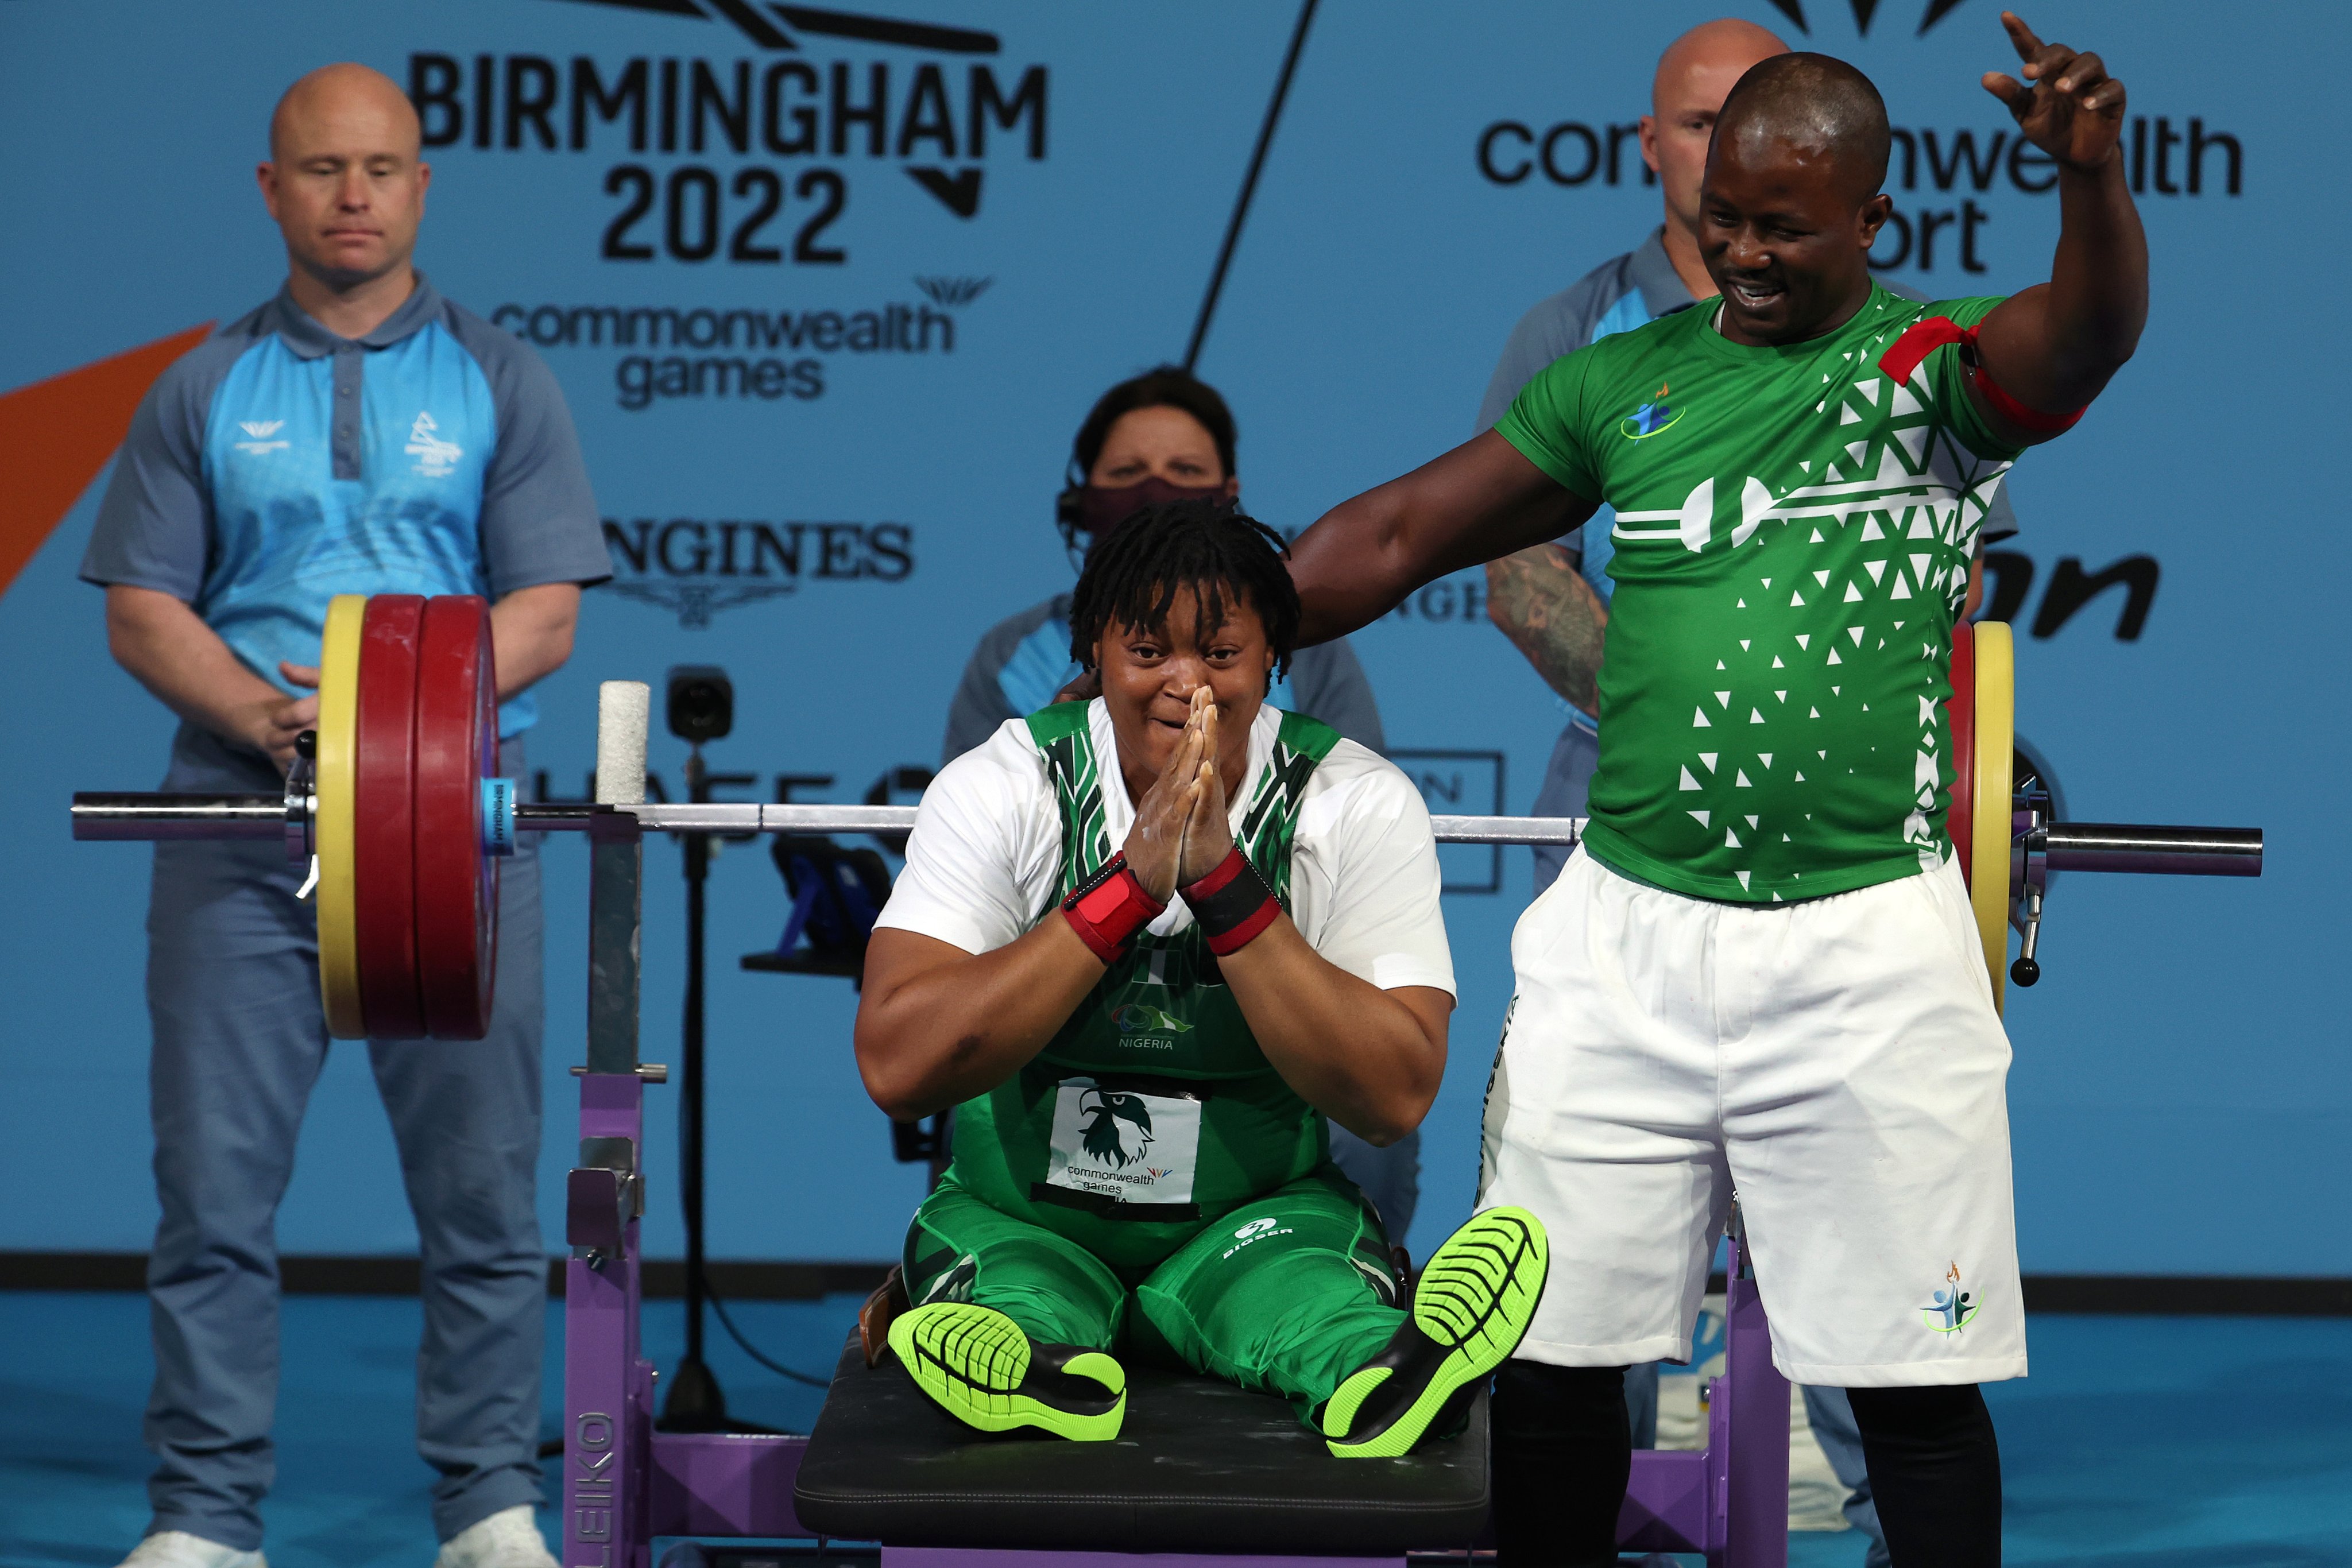 Meet Amusan, Ese Brume & 10 others who won Commonwealth Games Gold medals